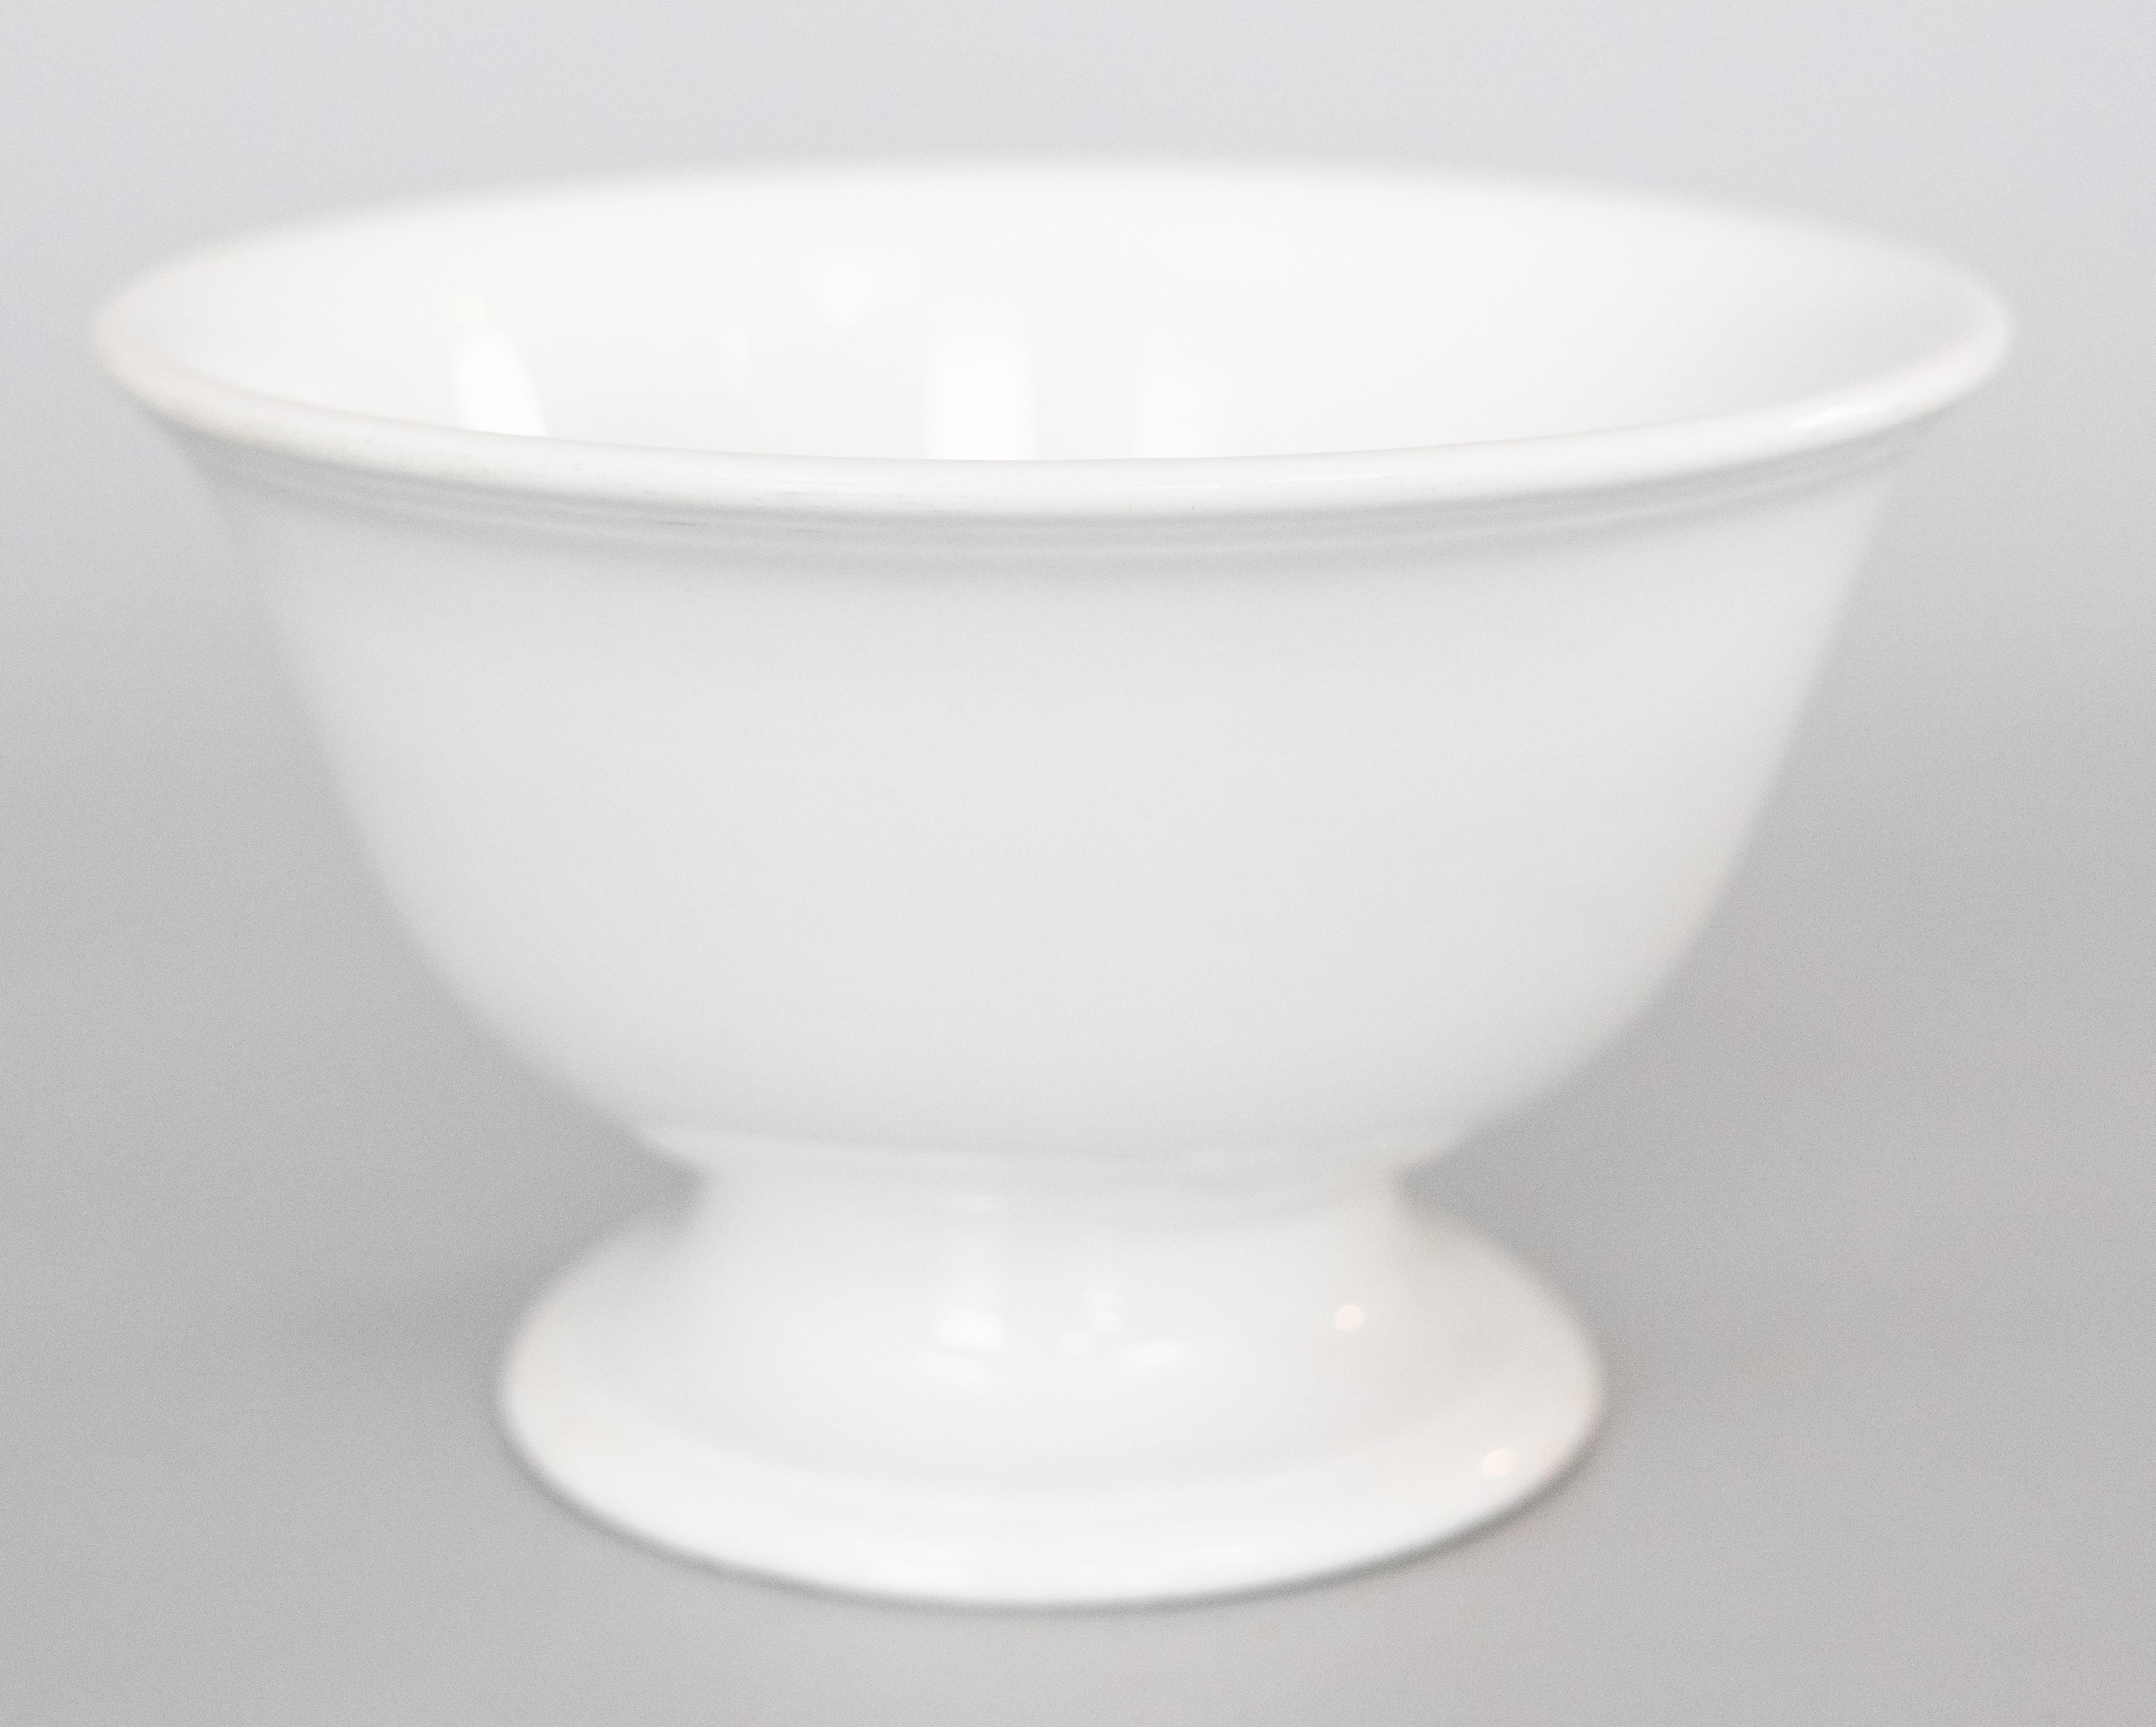 A lovely antique 19th-Century English Staffordshire white ironstone pedestal punch bowl by Johnson Brothers, Hanley, Stoke-on-Trent, England, circa 1880. Maker's mark on reverse. A highly collectible ironstone piece in beautiful antique condition.